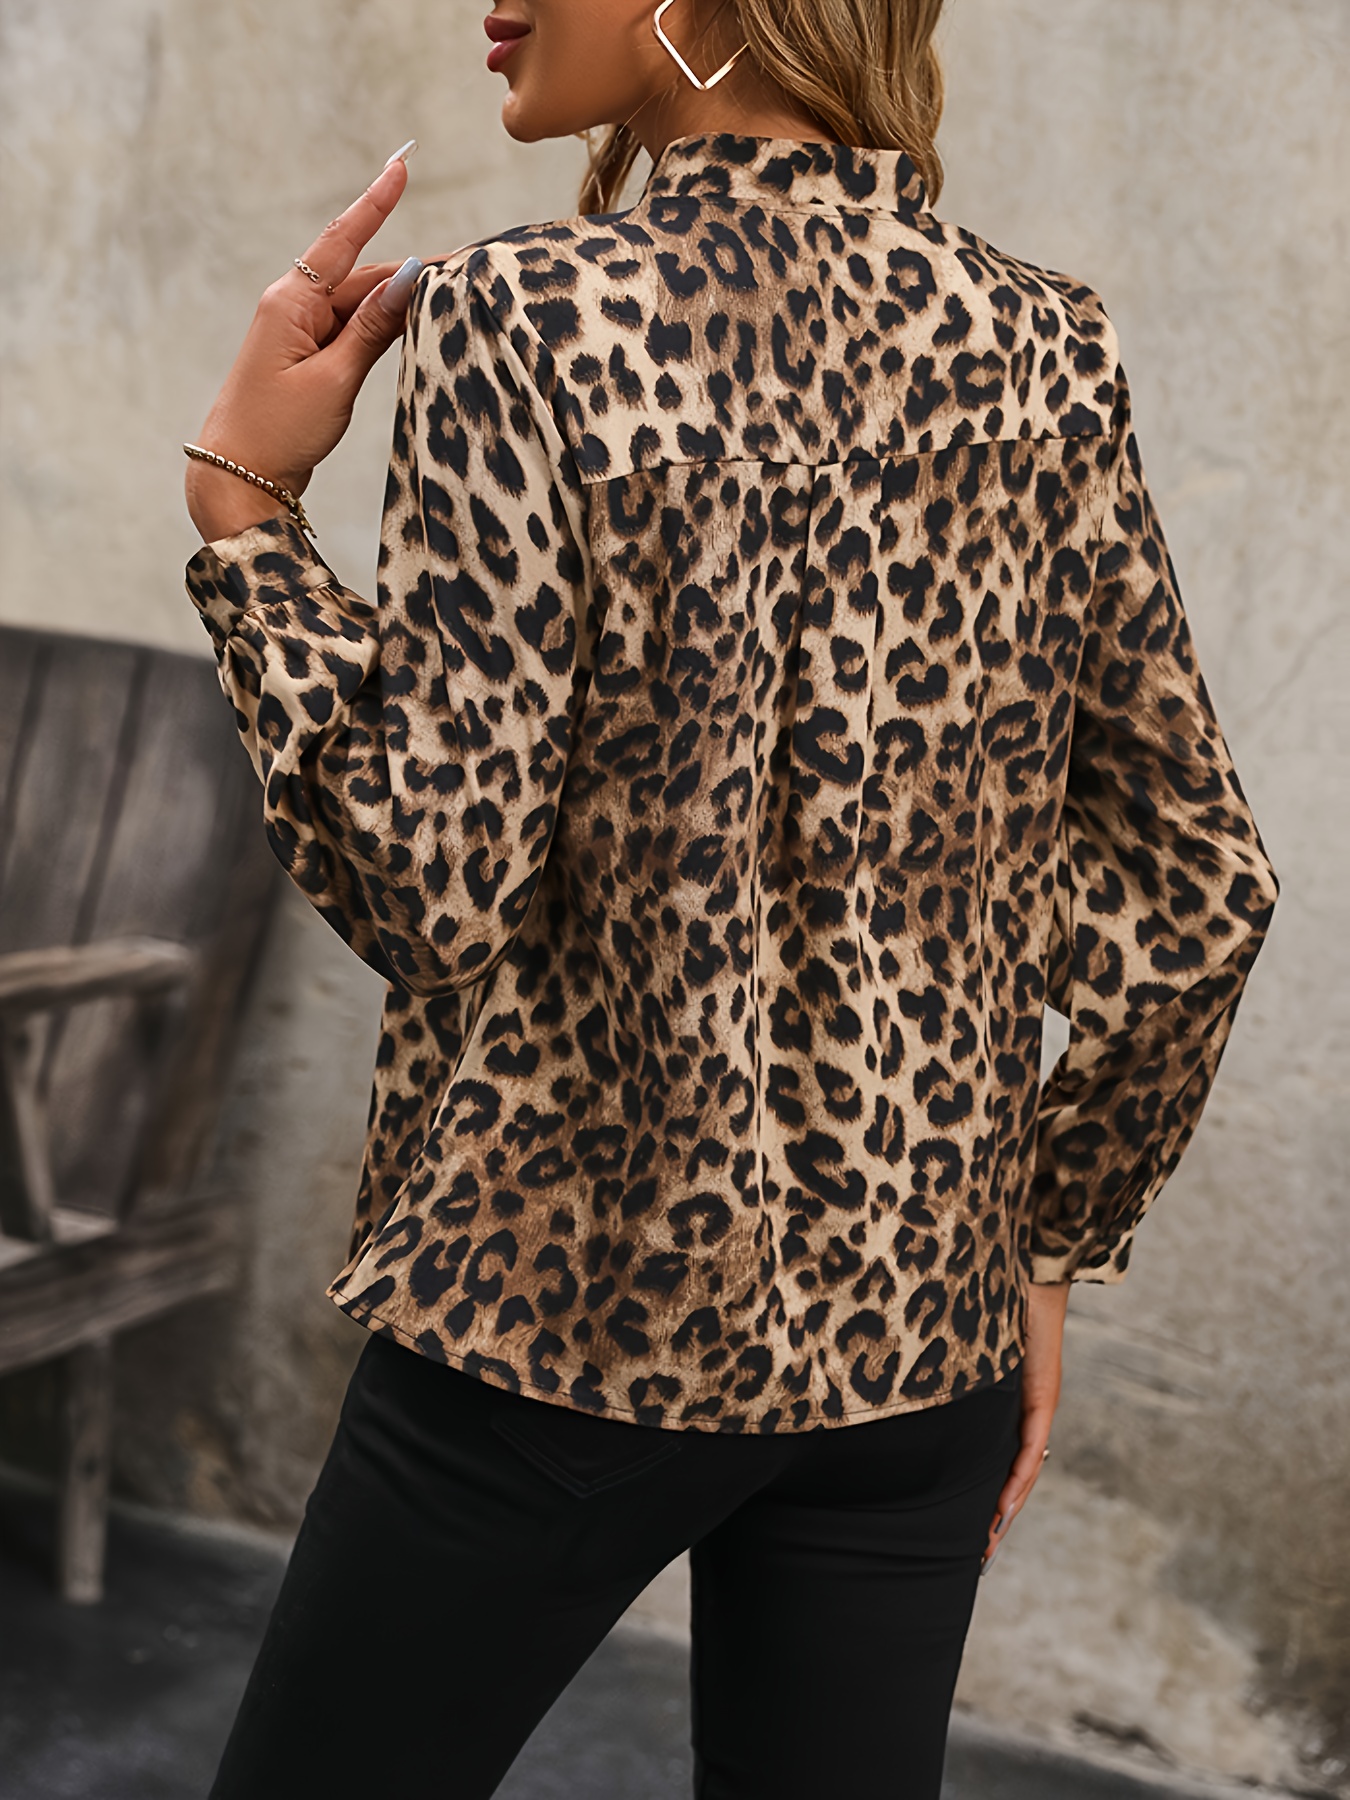 leopard print v neck shirt casual long sleeve shirt for every day womens clothing